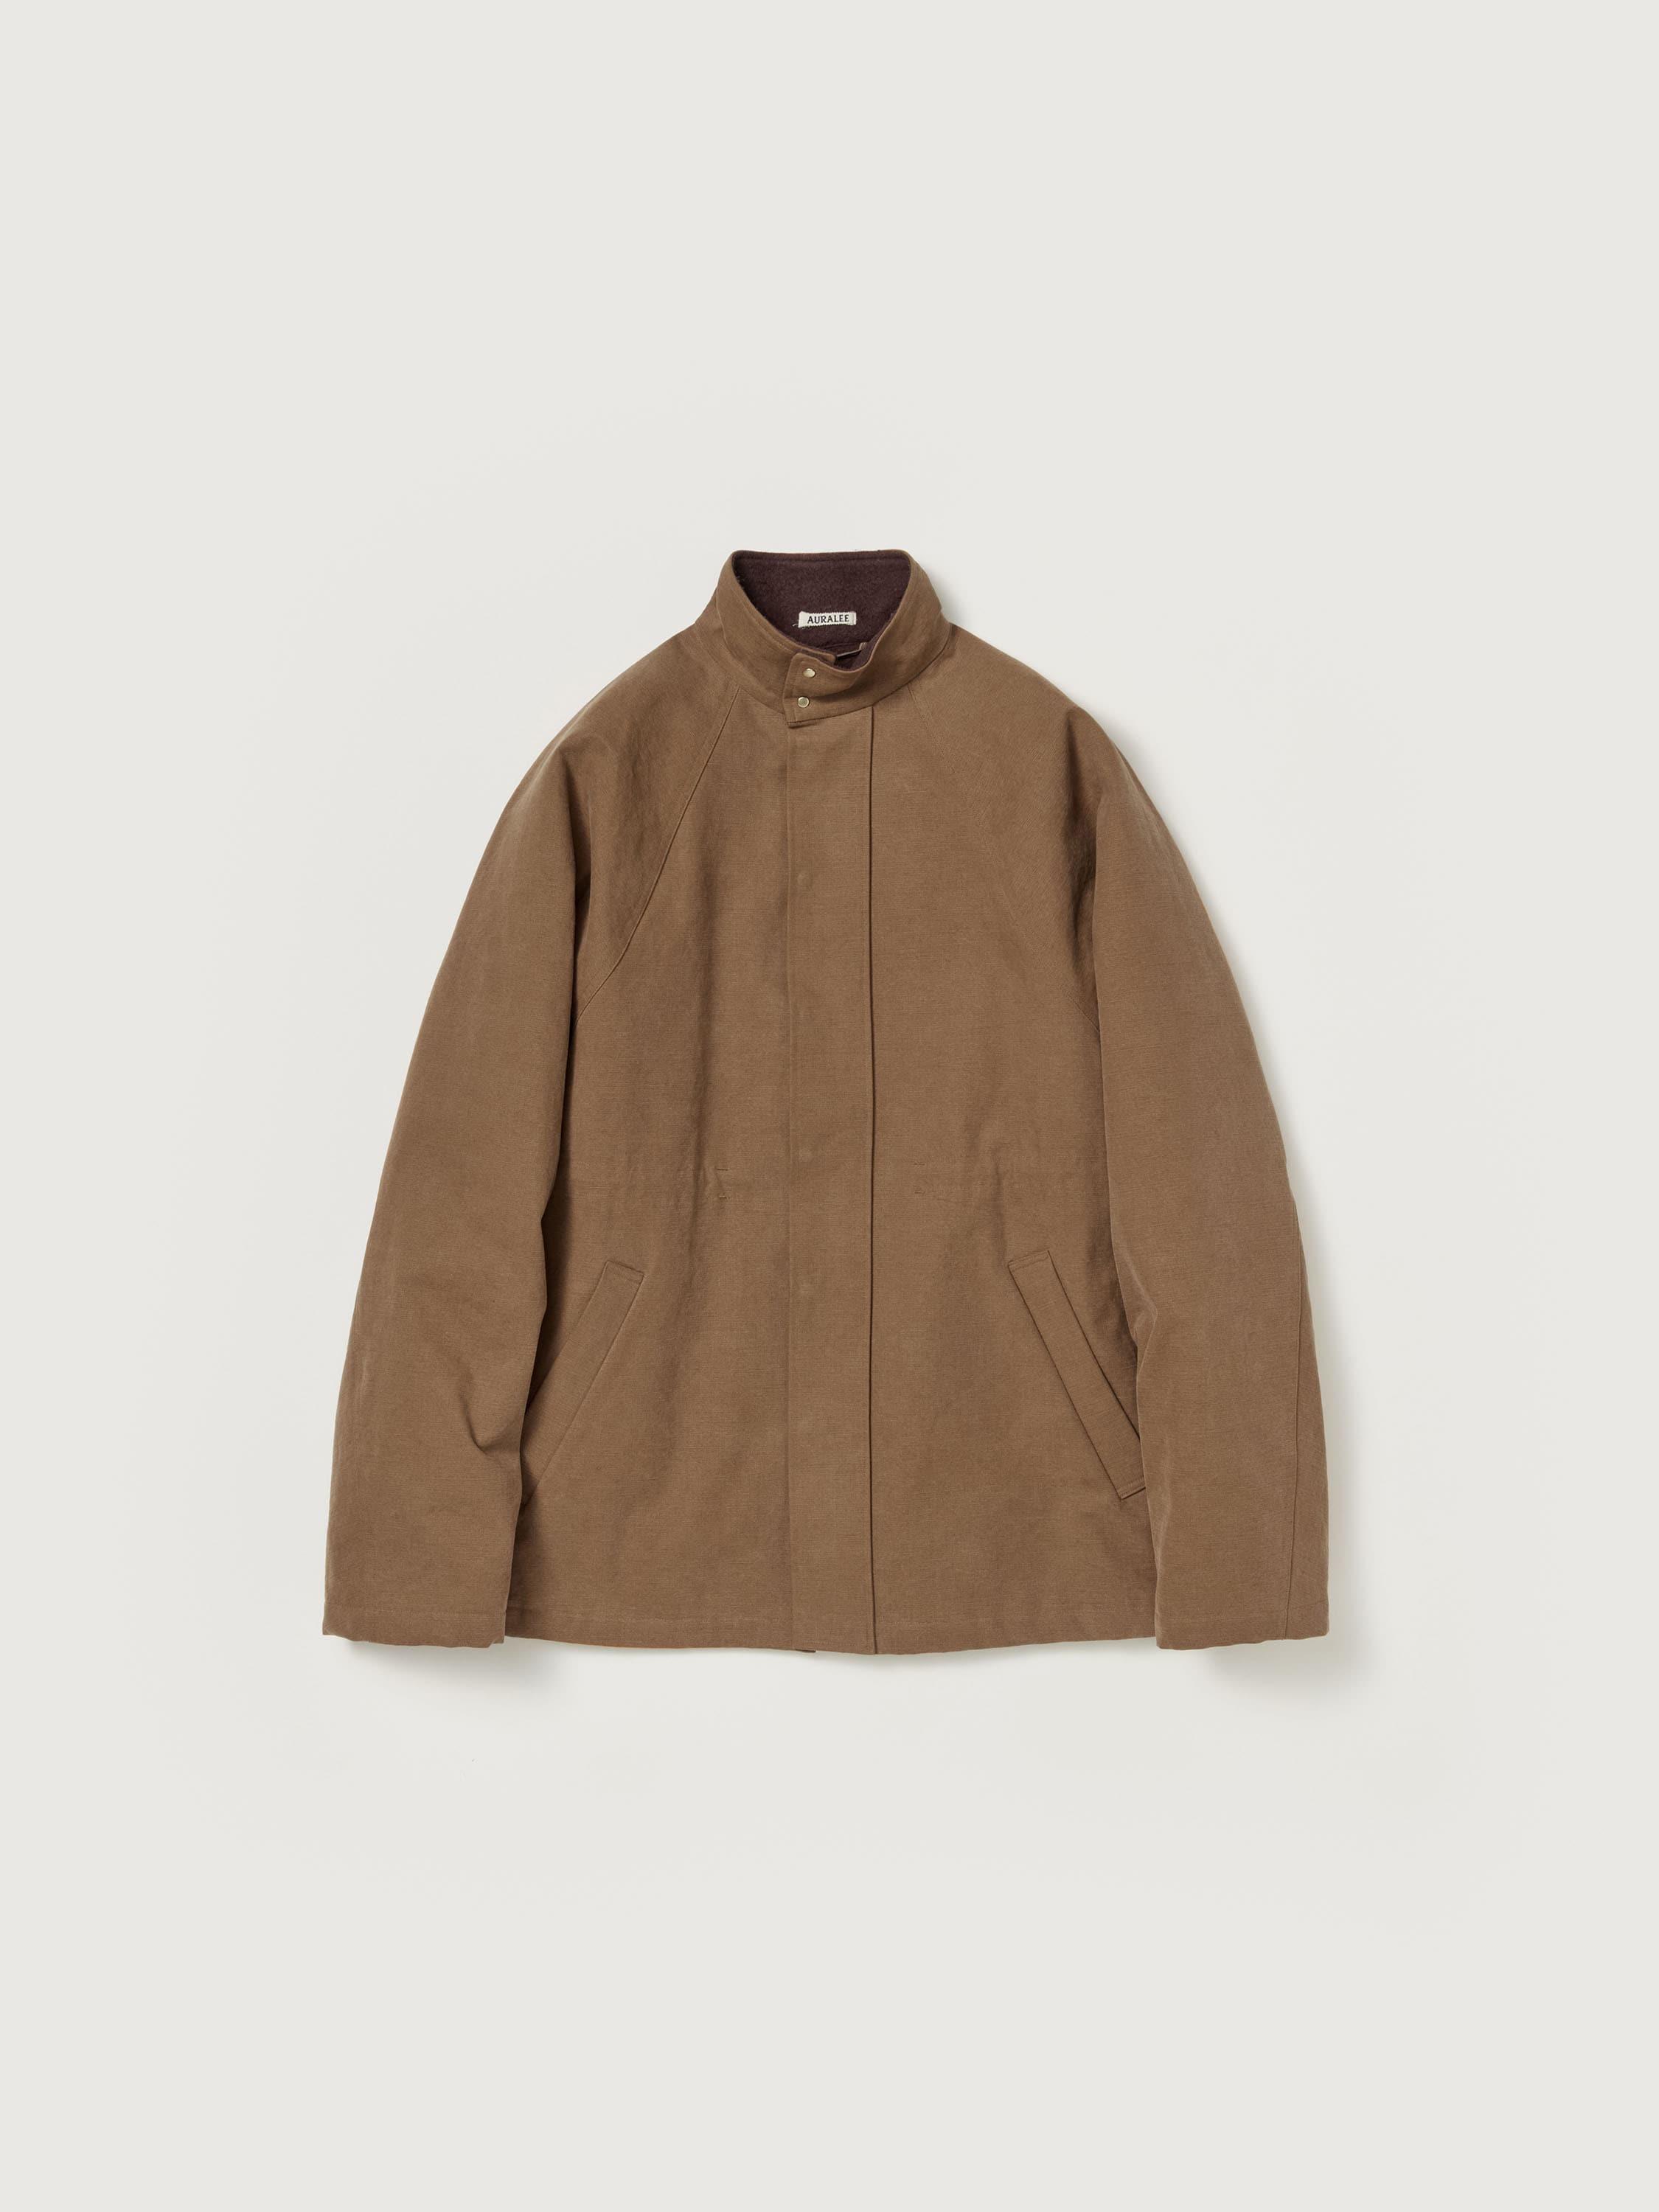 WASHED HEAVY CANVAS BLOUSON 詳細画像 BROWN 5